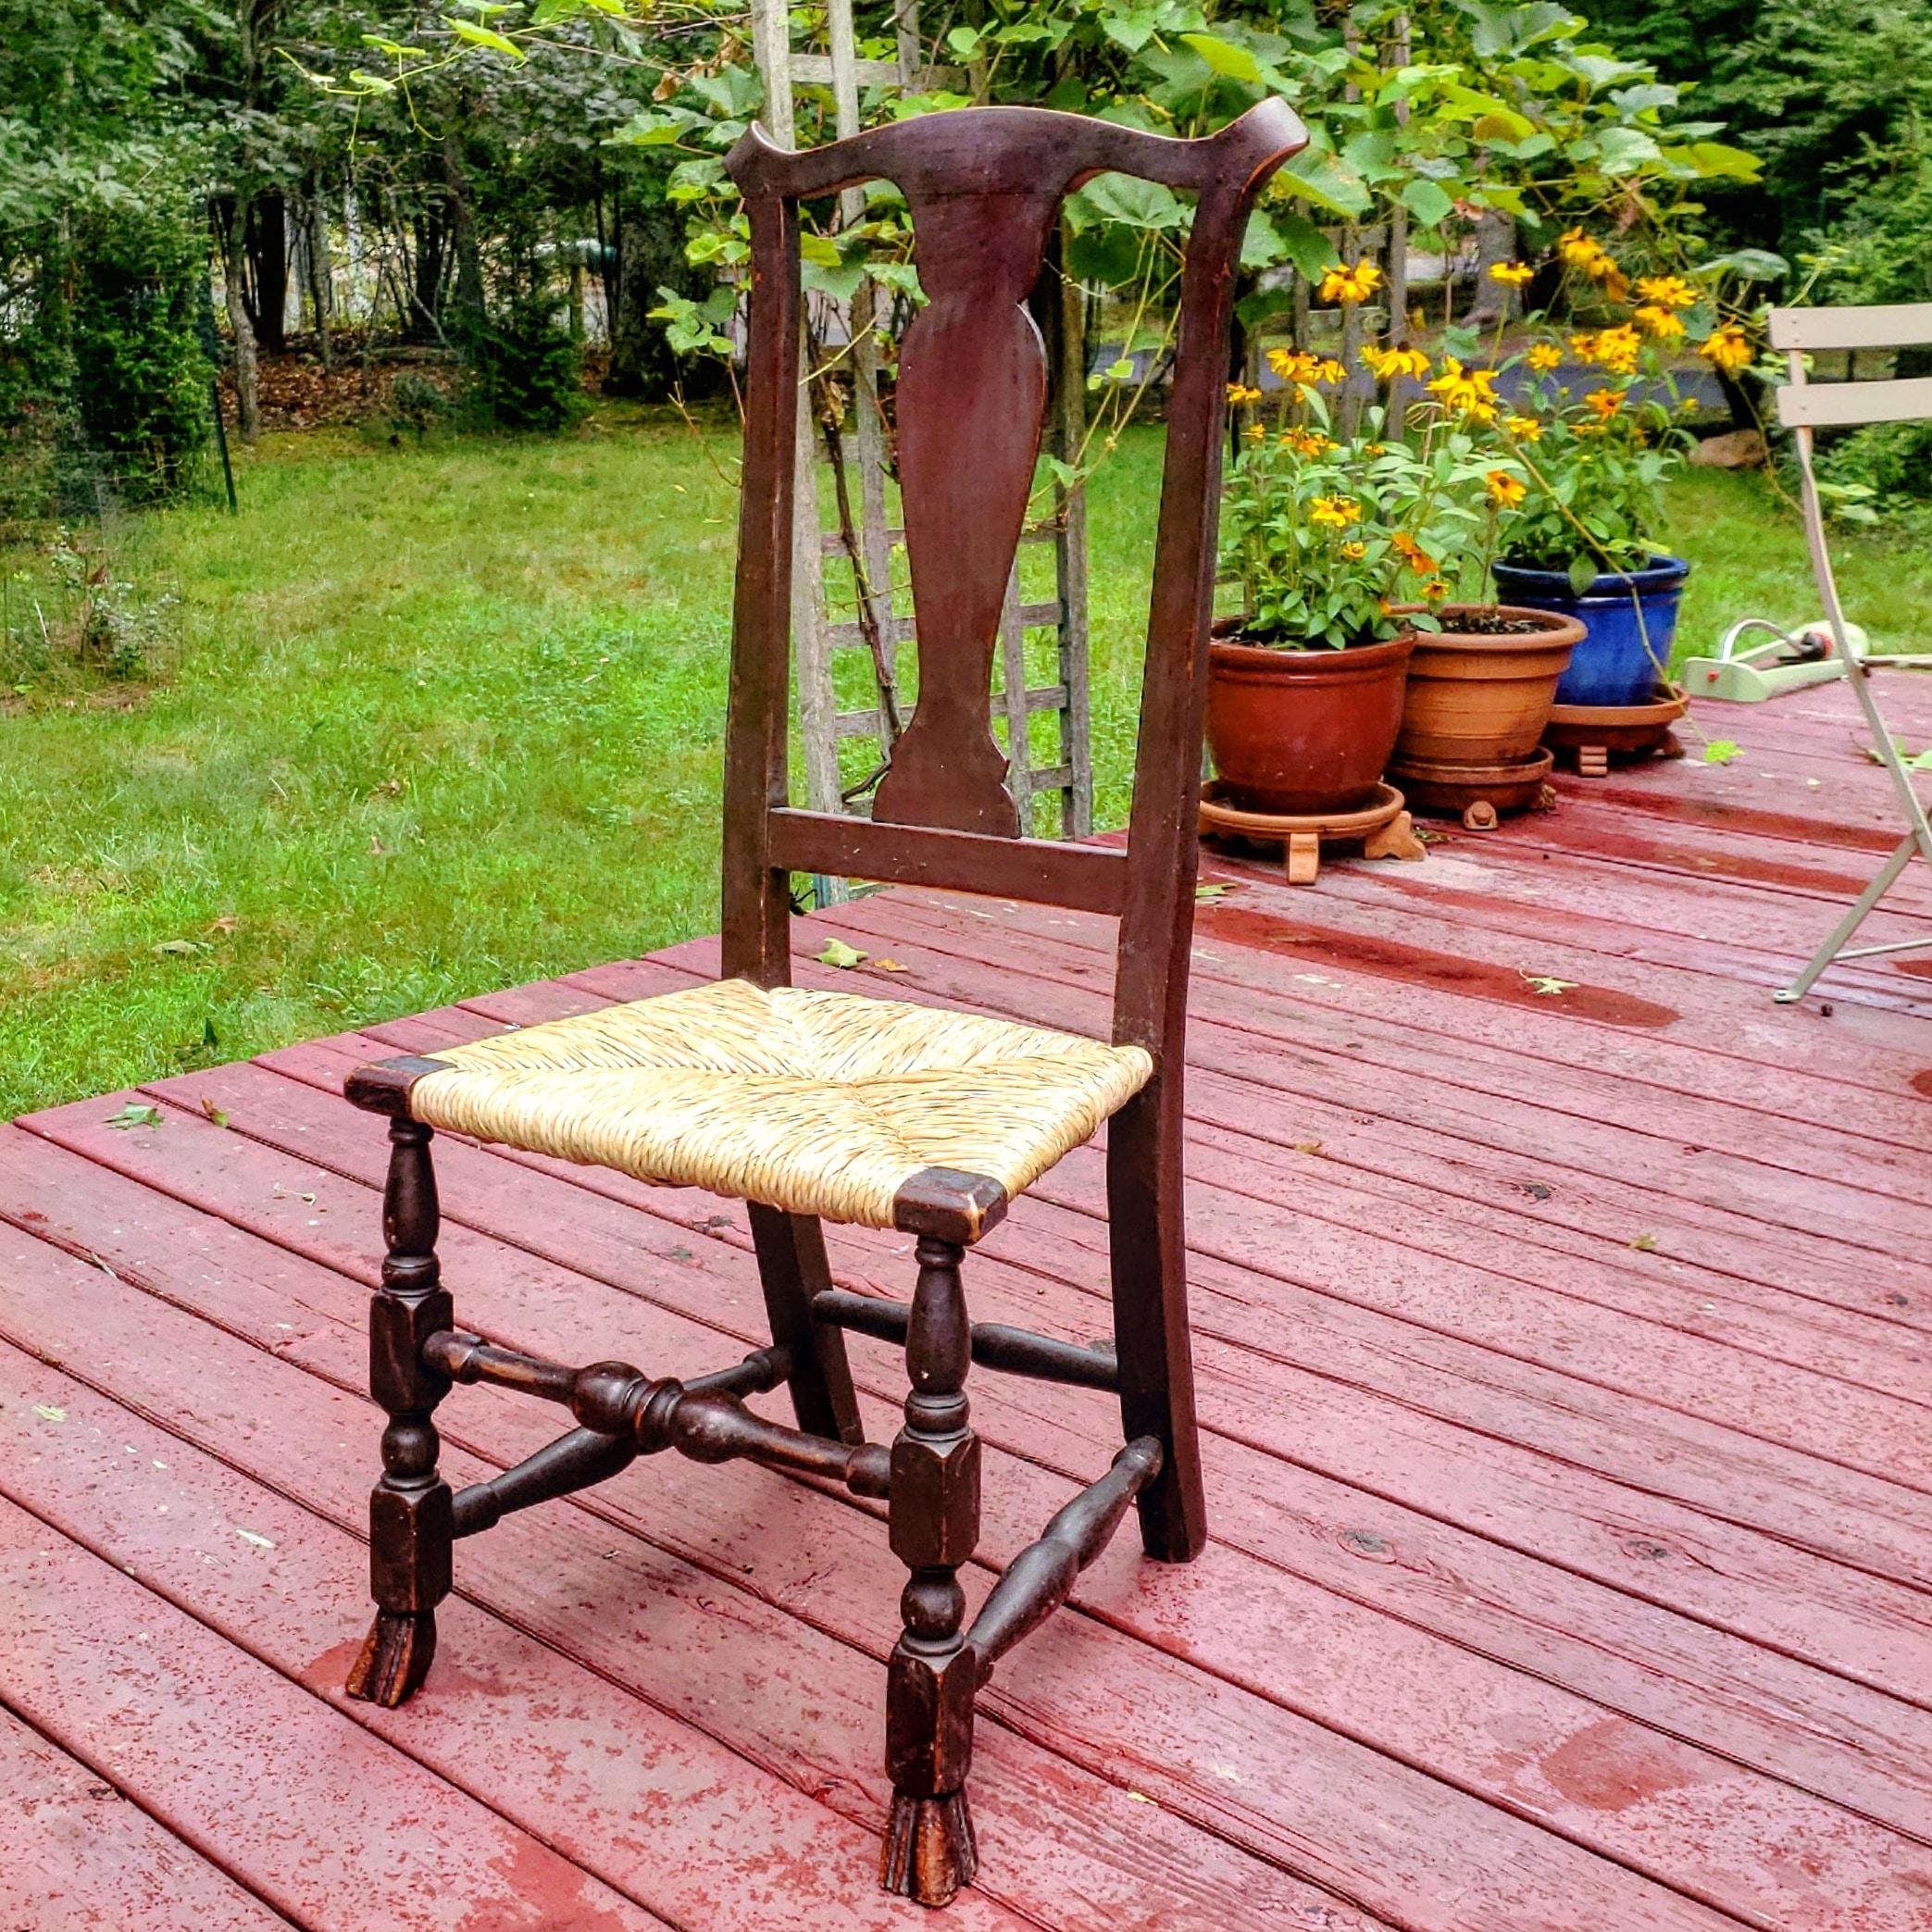 Chippendale painted old red maple side chair with vasiform splat, cupid's bow crest and carved Spanish feet. Made in New England, most likely Connecticut, about 1770. All original with replaced natural rush seat. Exceptional turnings with a very